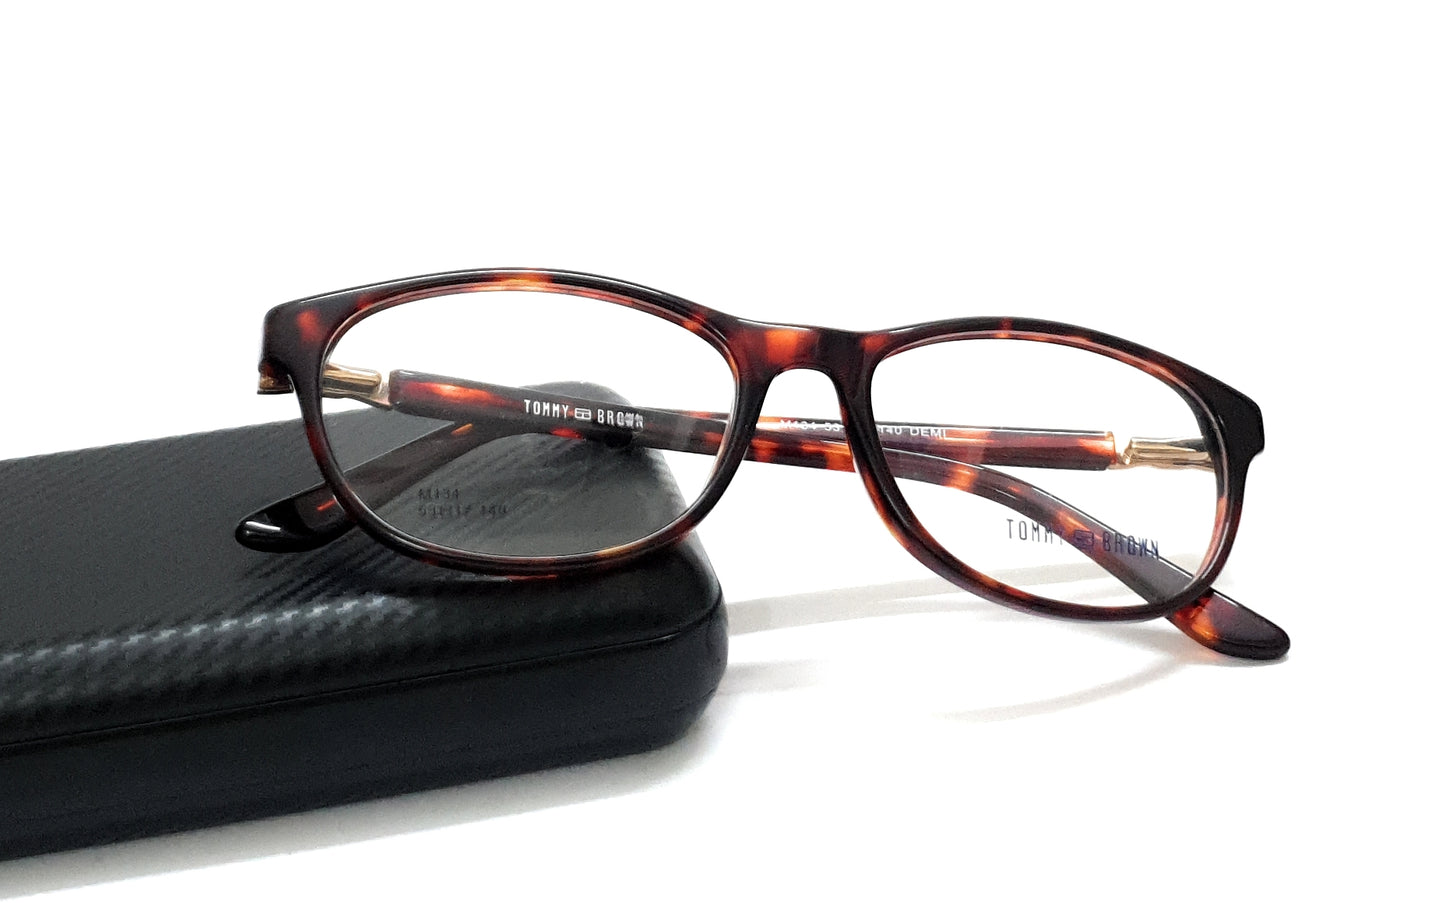 Tommy Brown Styles Eyeglasses M134 DA Brown Spectacle